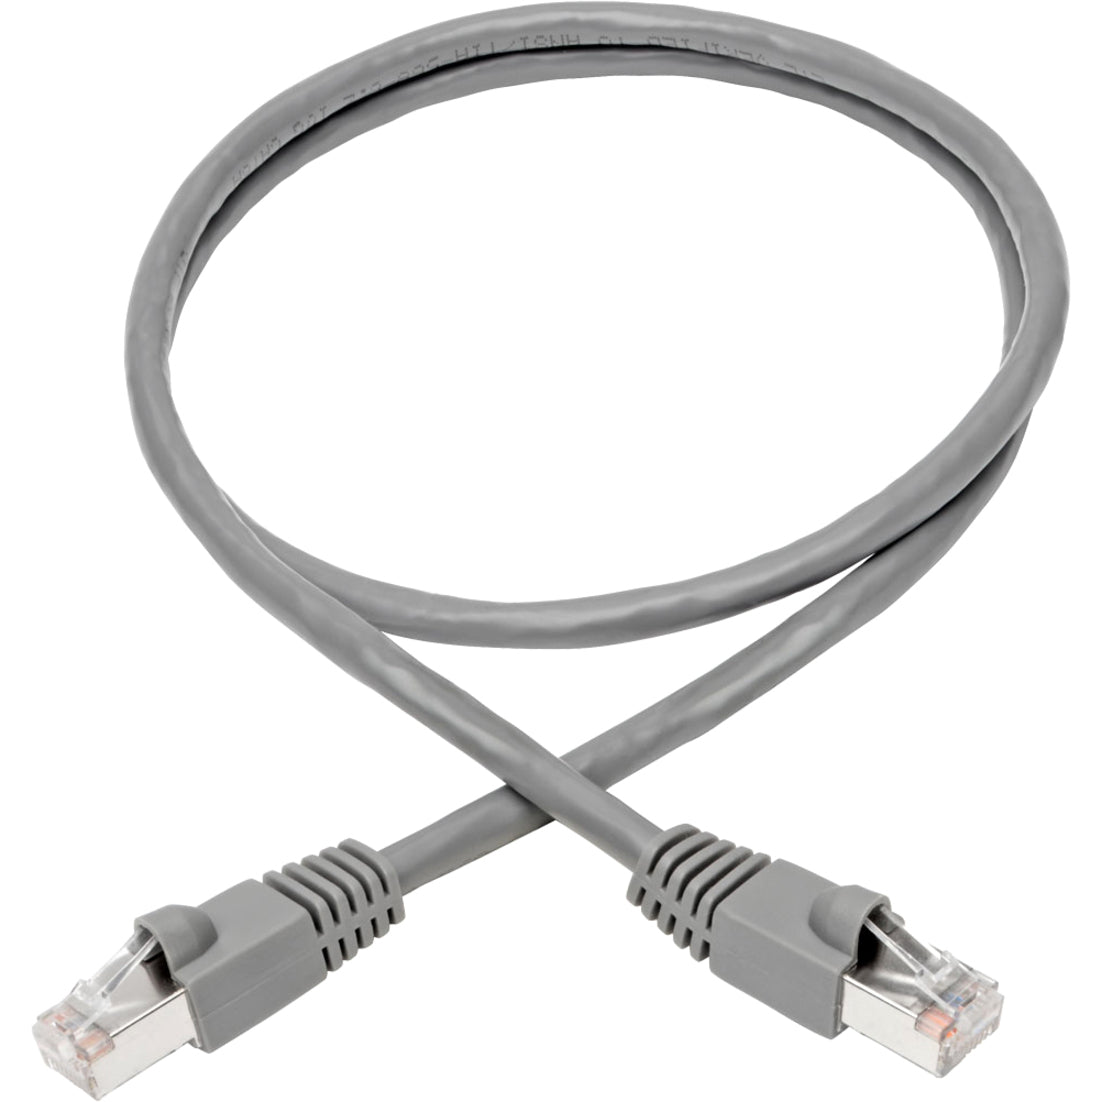 Tripp Lite N262-003-GY Cat.6a STP Patch Network Cable, 3 ft, 10G, Shielded, Gray